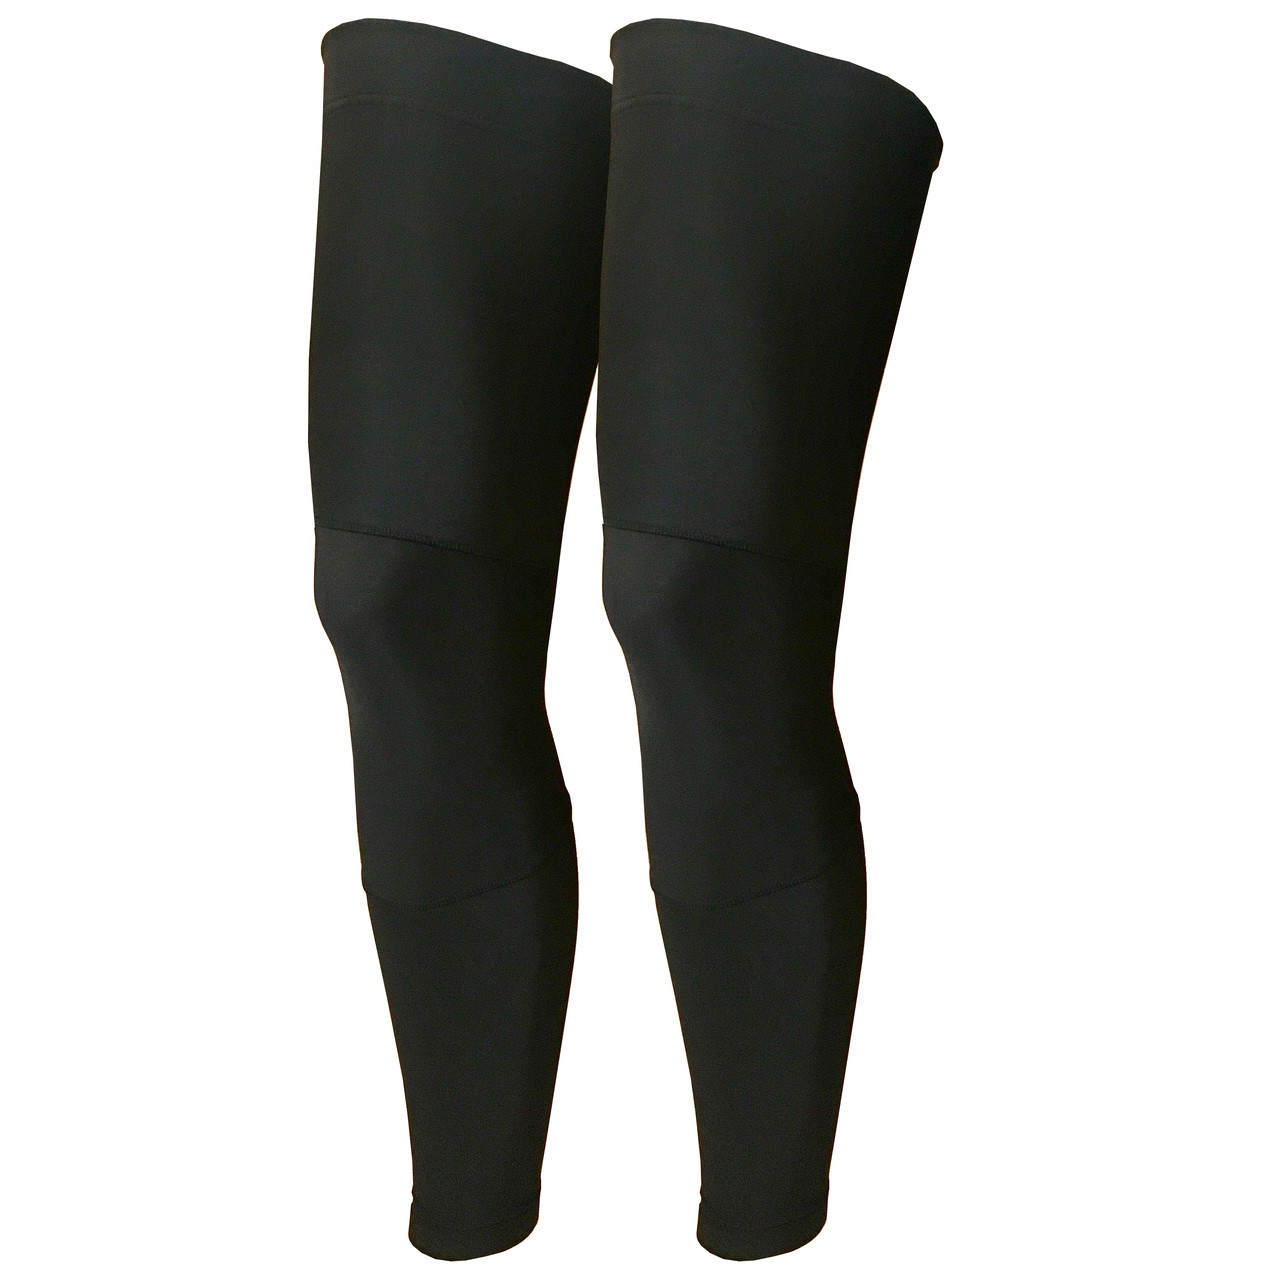 https://cdn11.bigcommerce.com/s-af44b/images/stencil/1280x1280/products/563/3935/Thermal_Leg_Warmers_Front_1__30502.1674068149.jpg?c=2